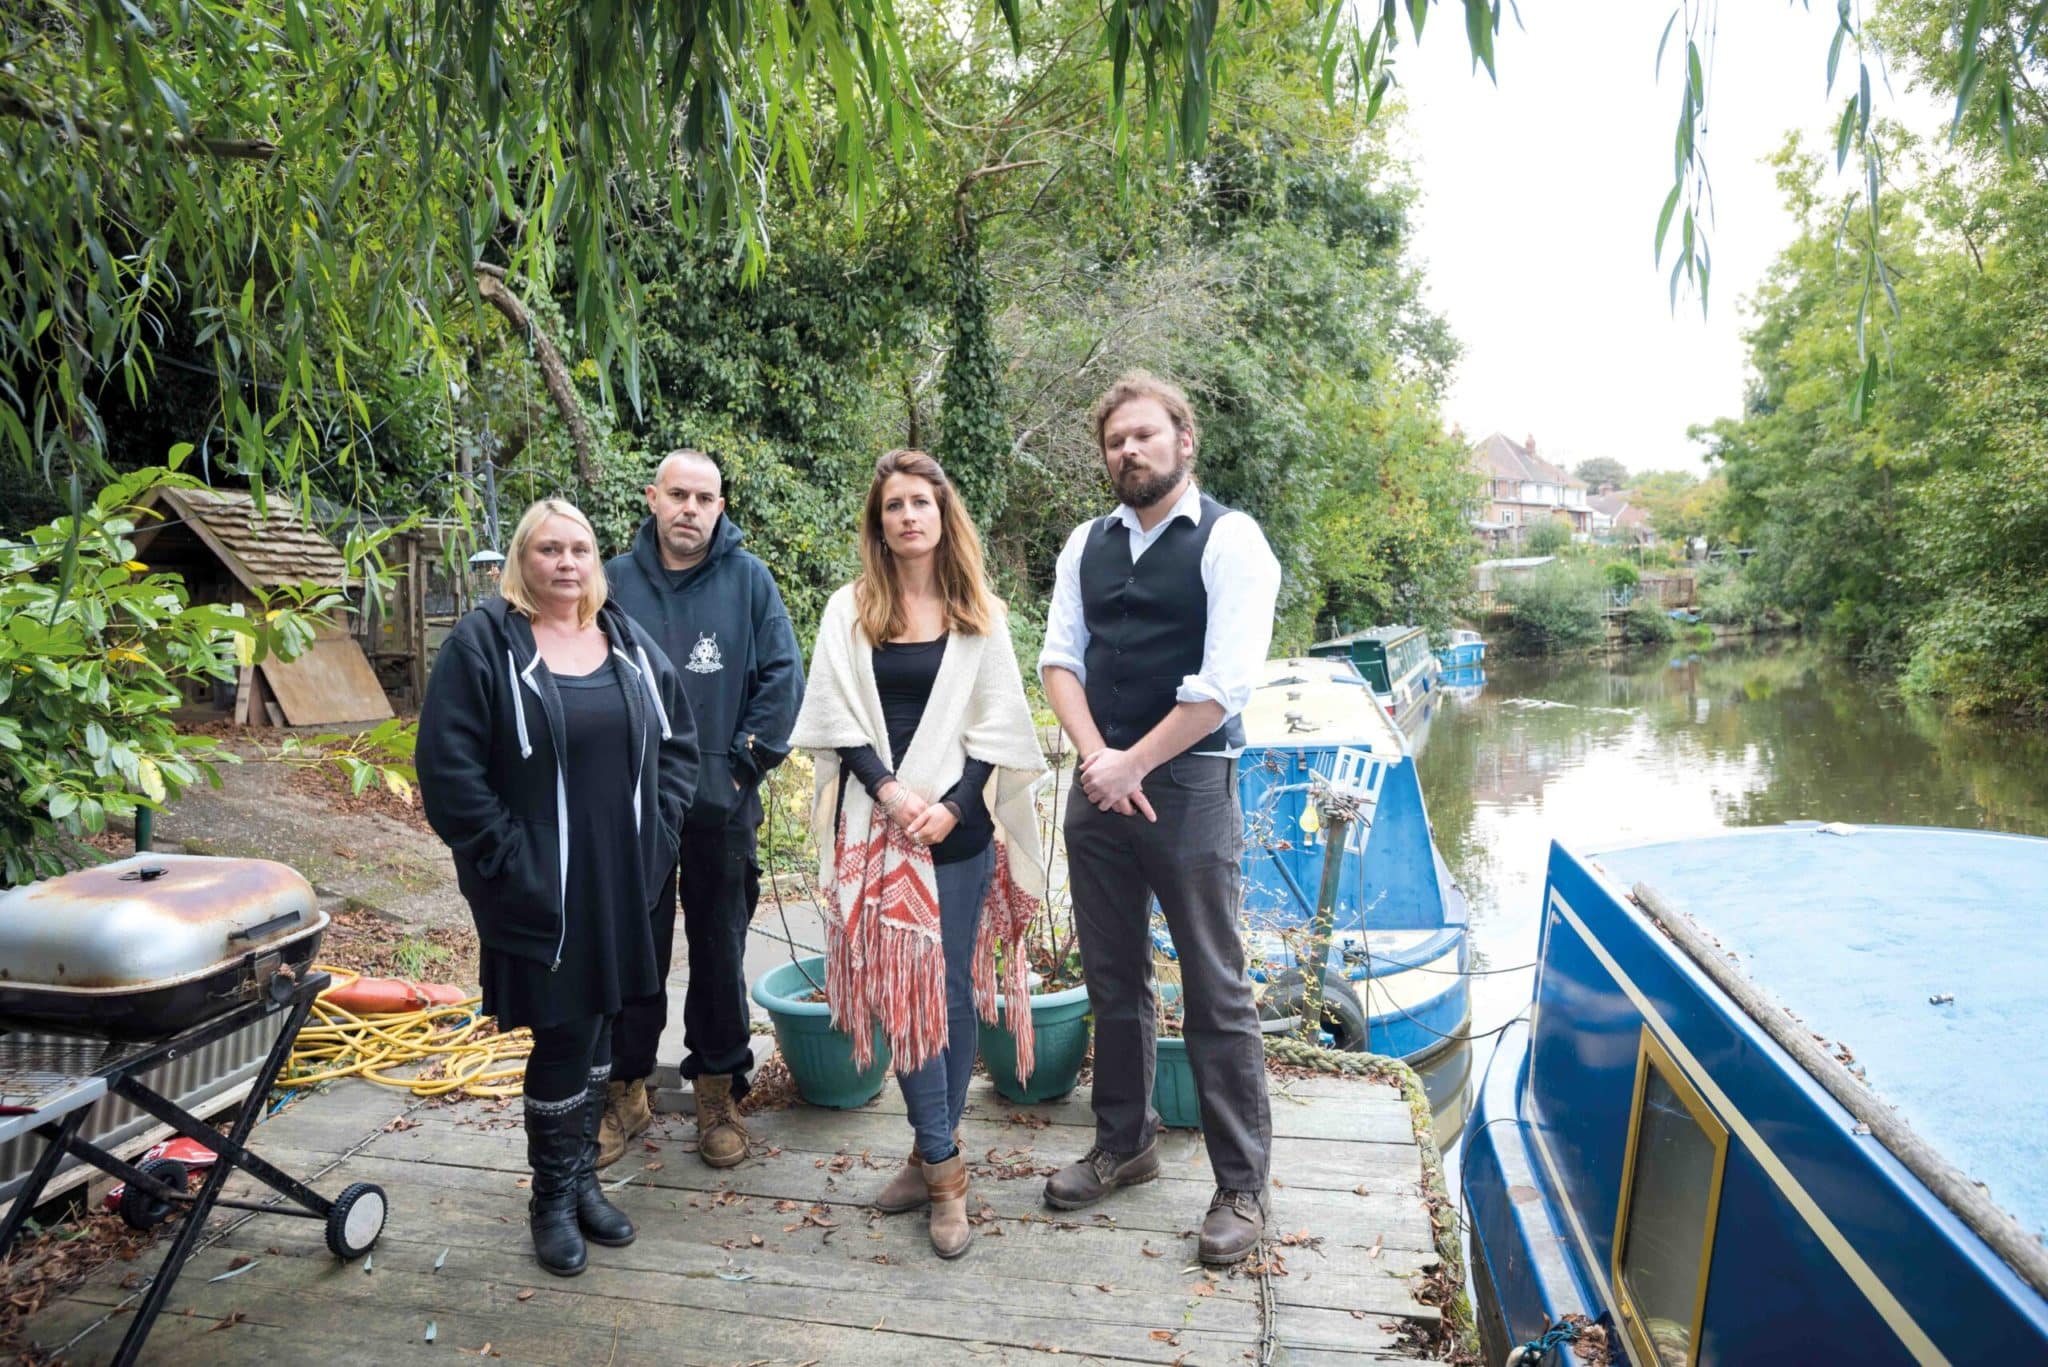 Judge sinks hopes for boaters to stay in Tonbridge